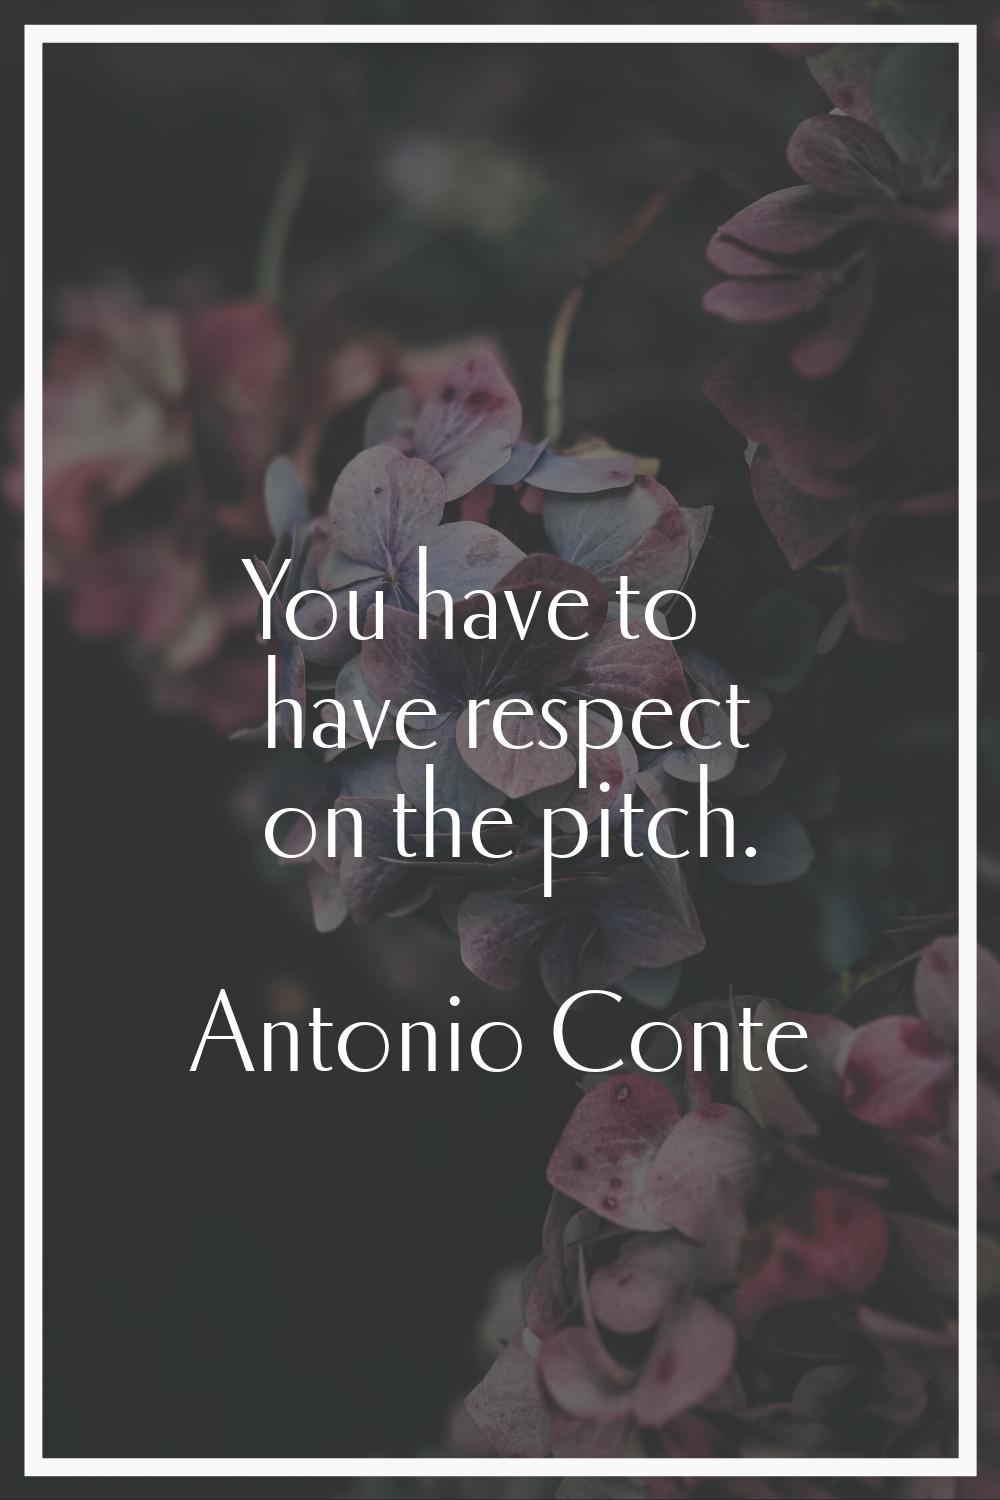 You have to have respect on the pitch.